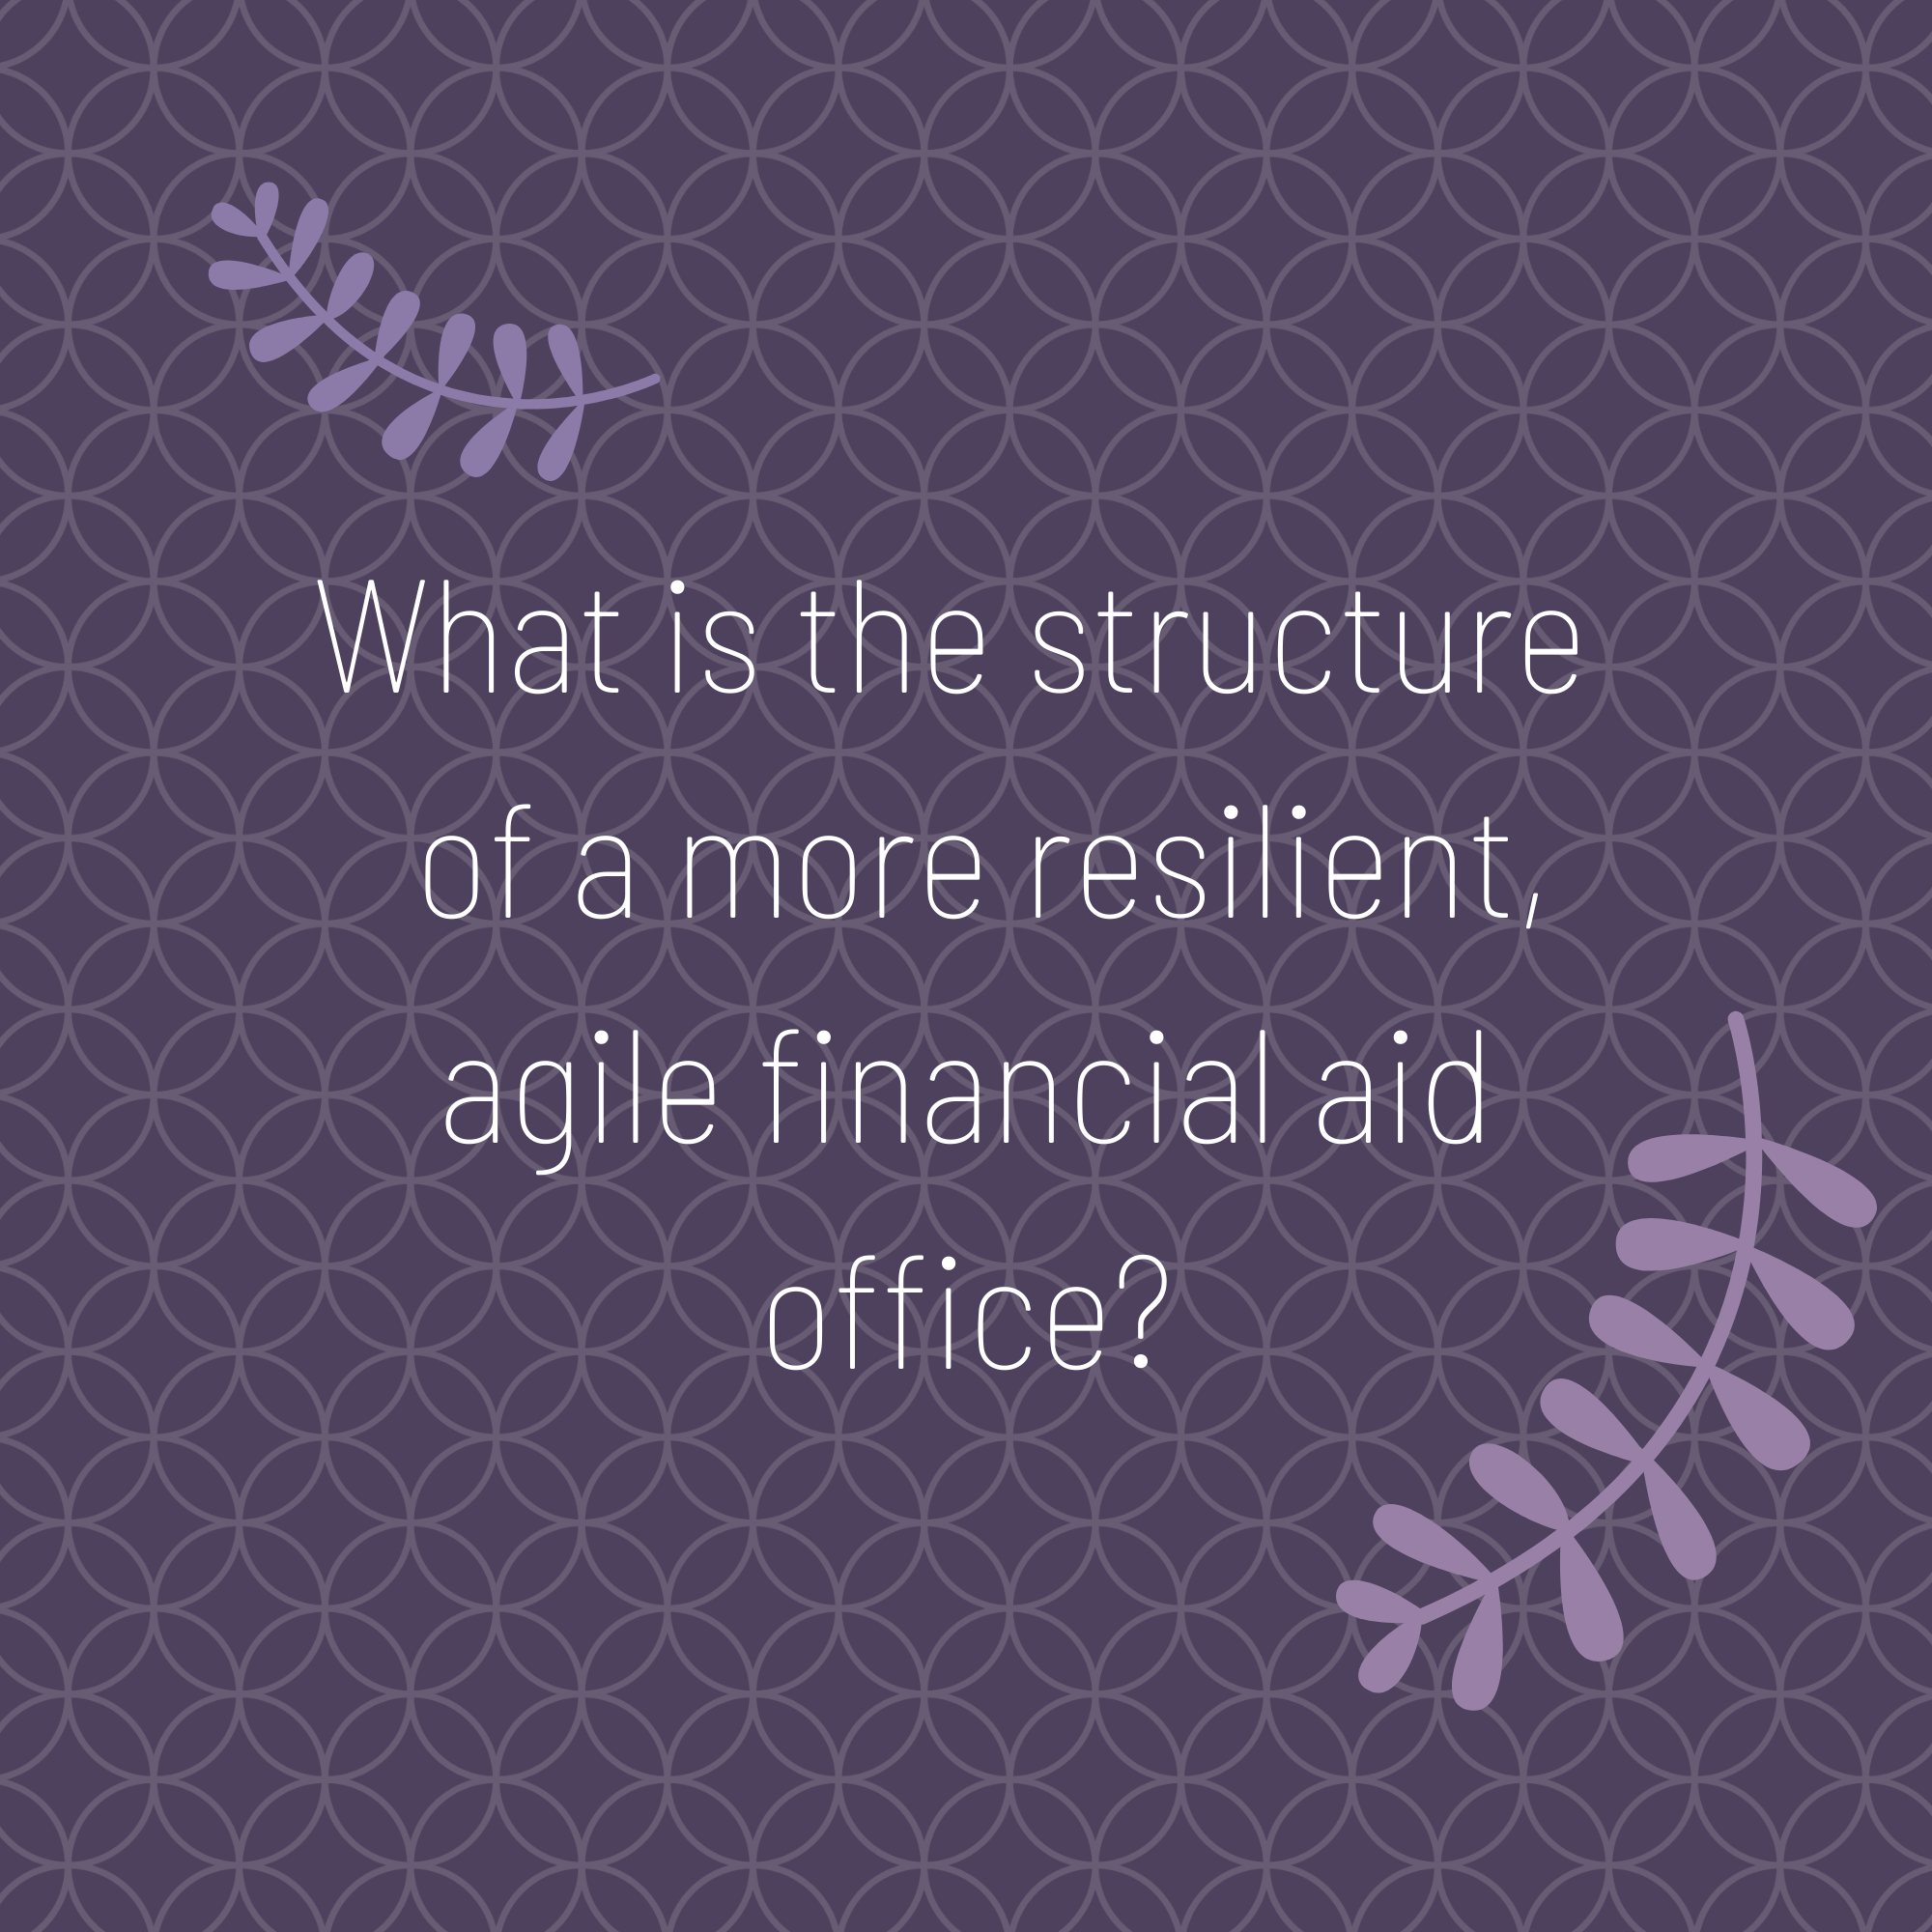 What is the structure of a more resilient, agile financial aid office?